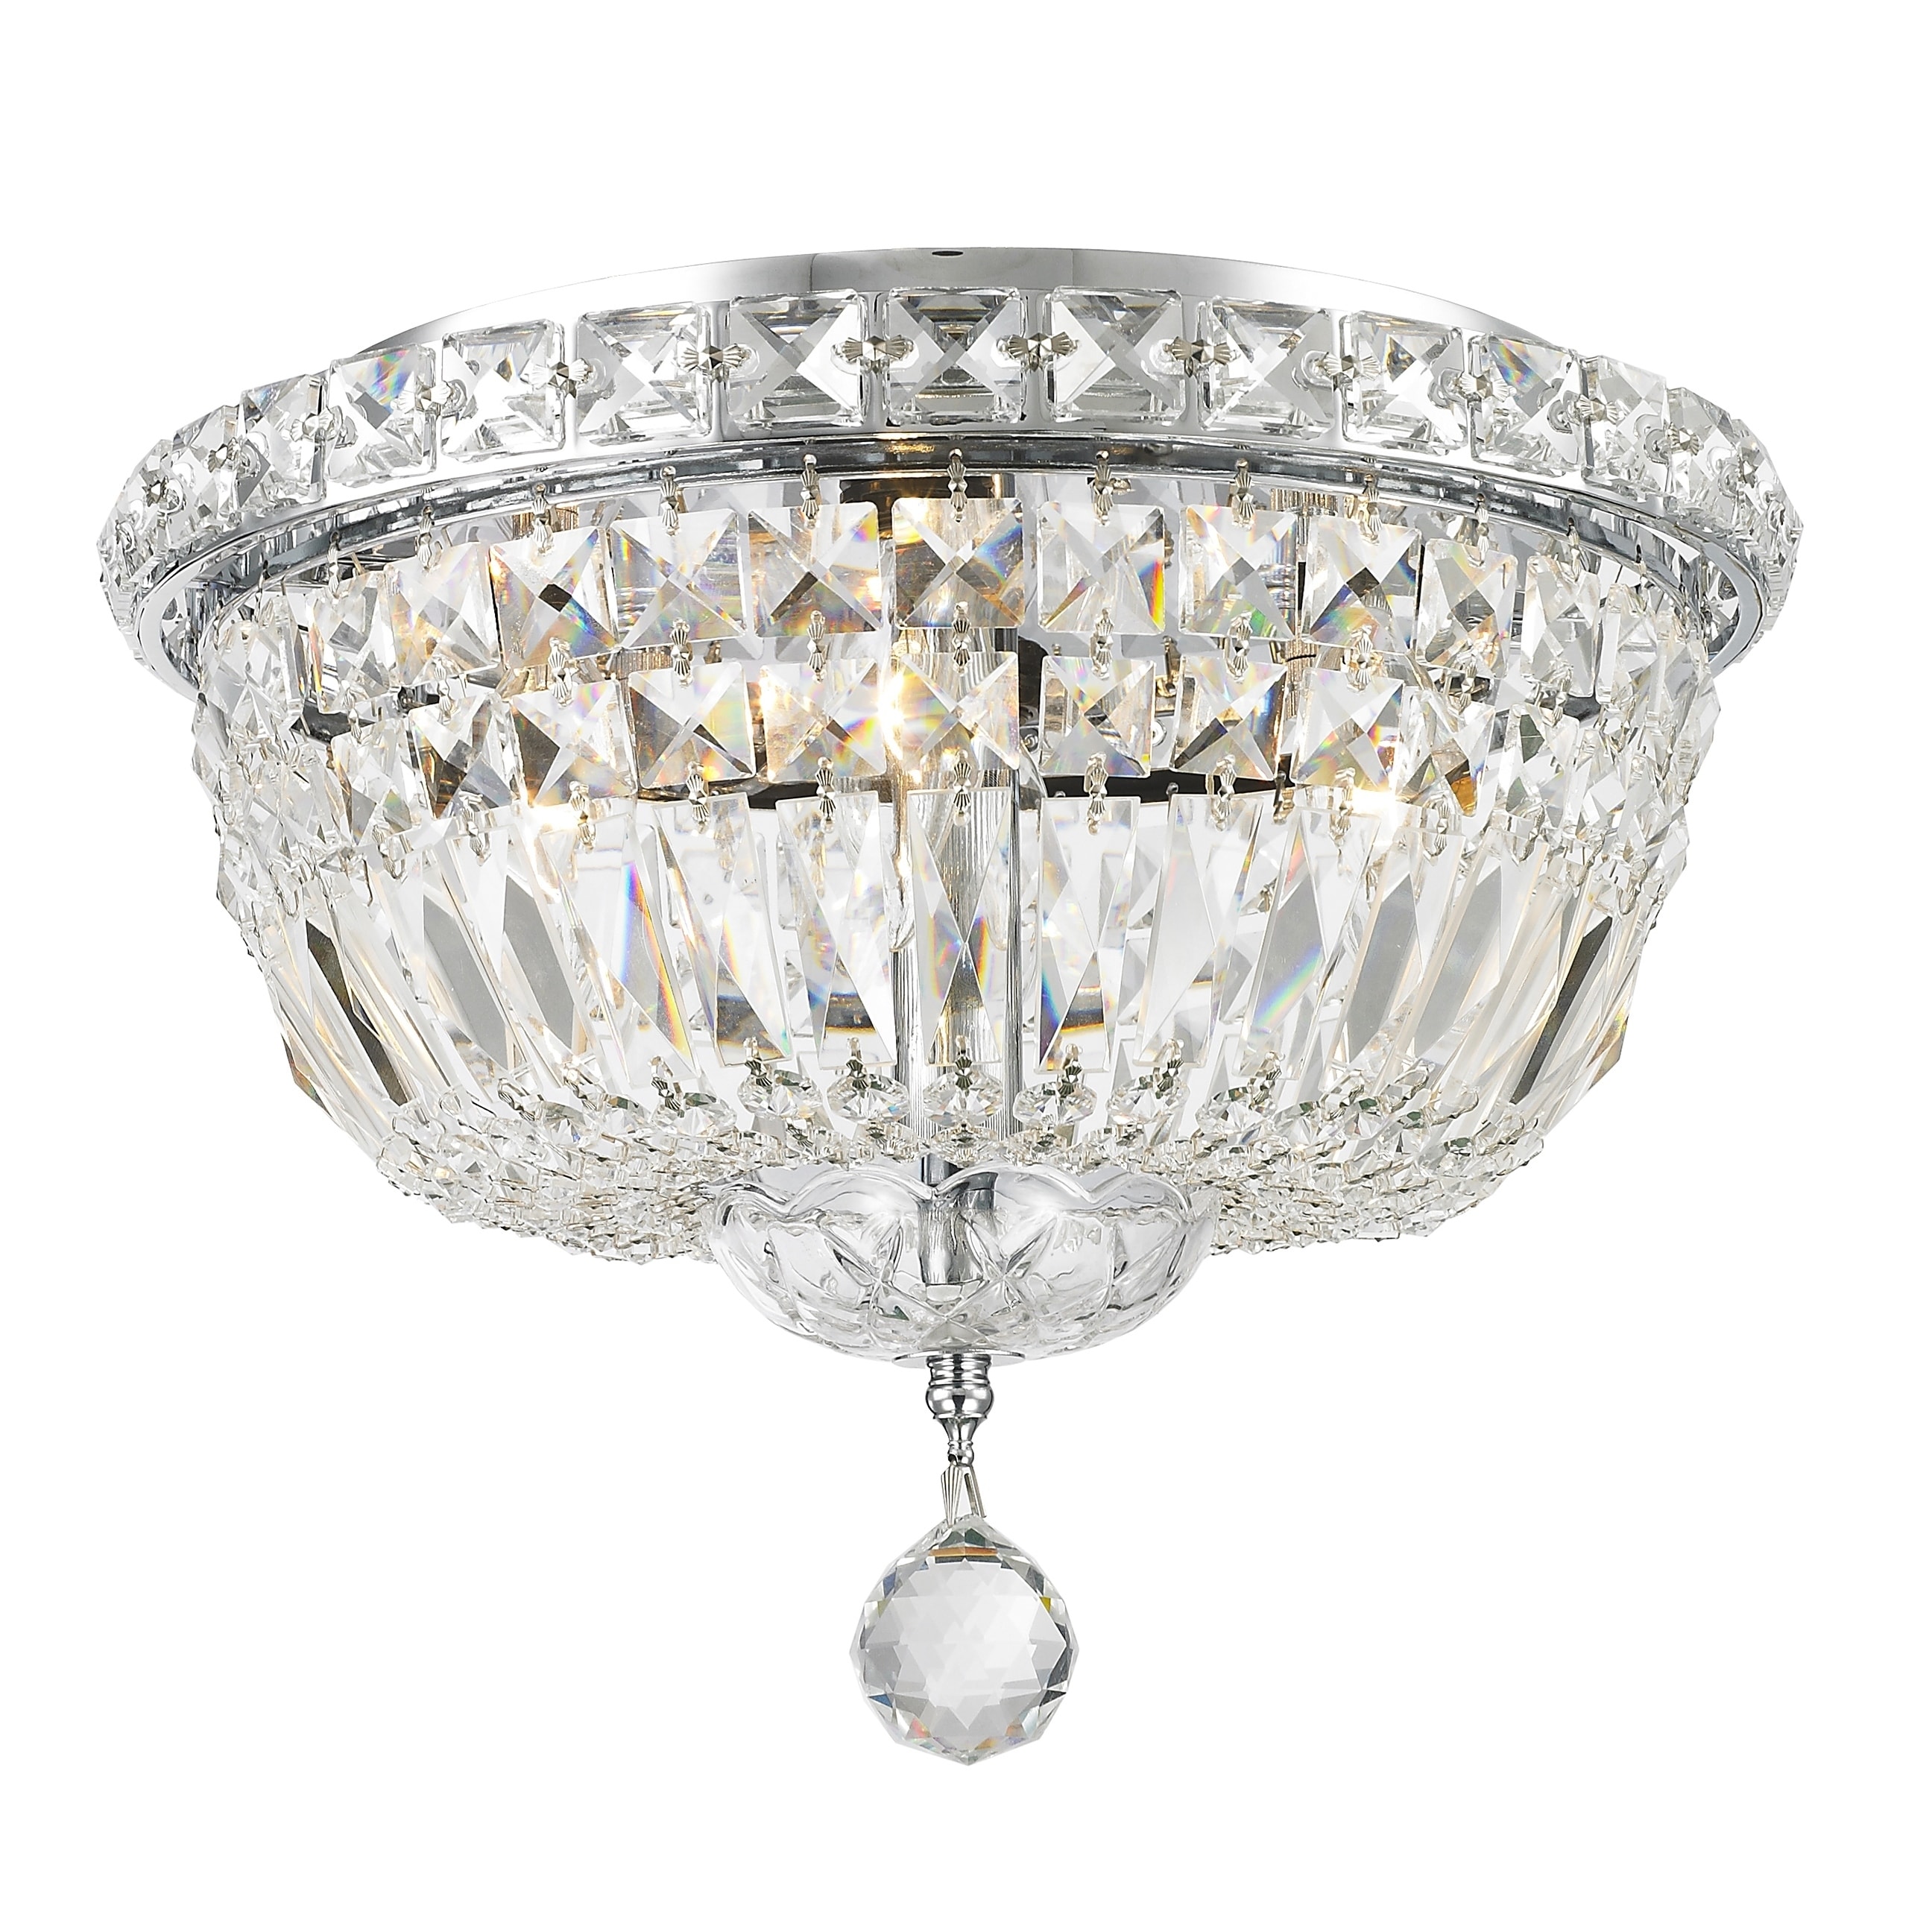 Shop French Empire 4 Light 12 In Chrome Finish Full Lead Crystal